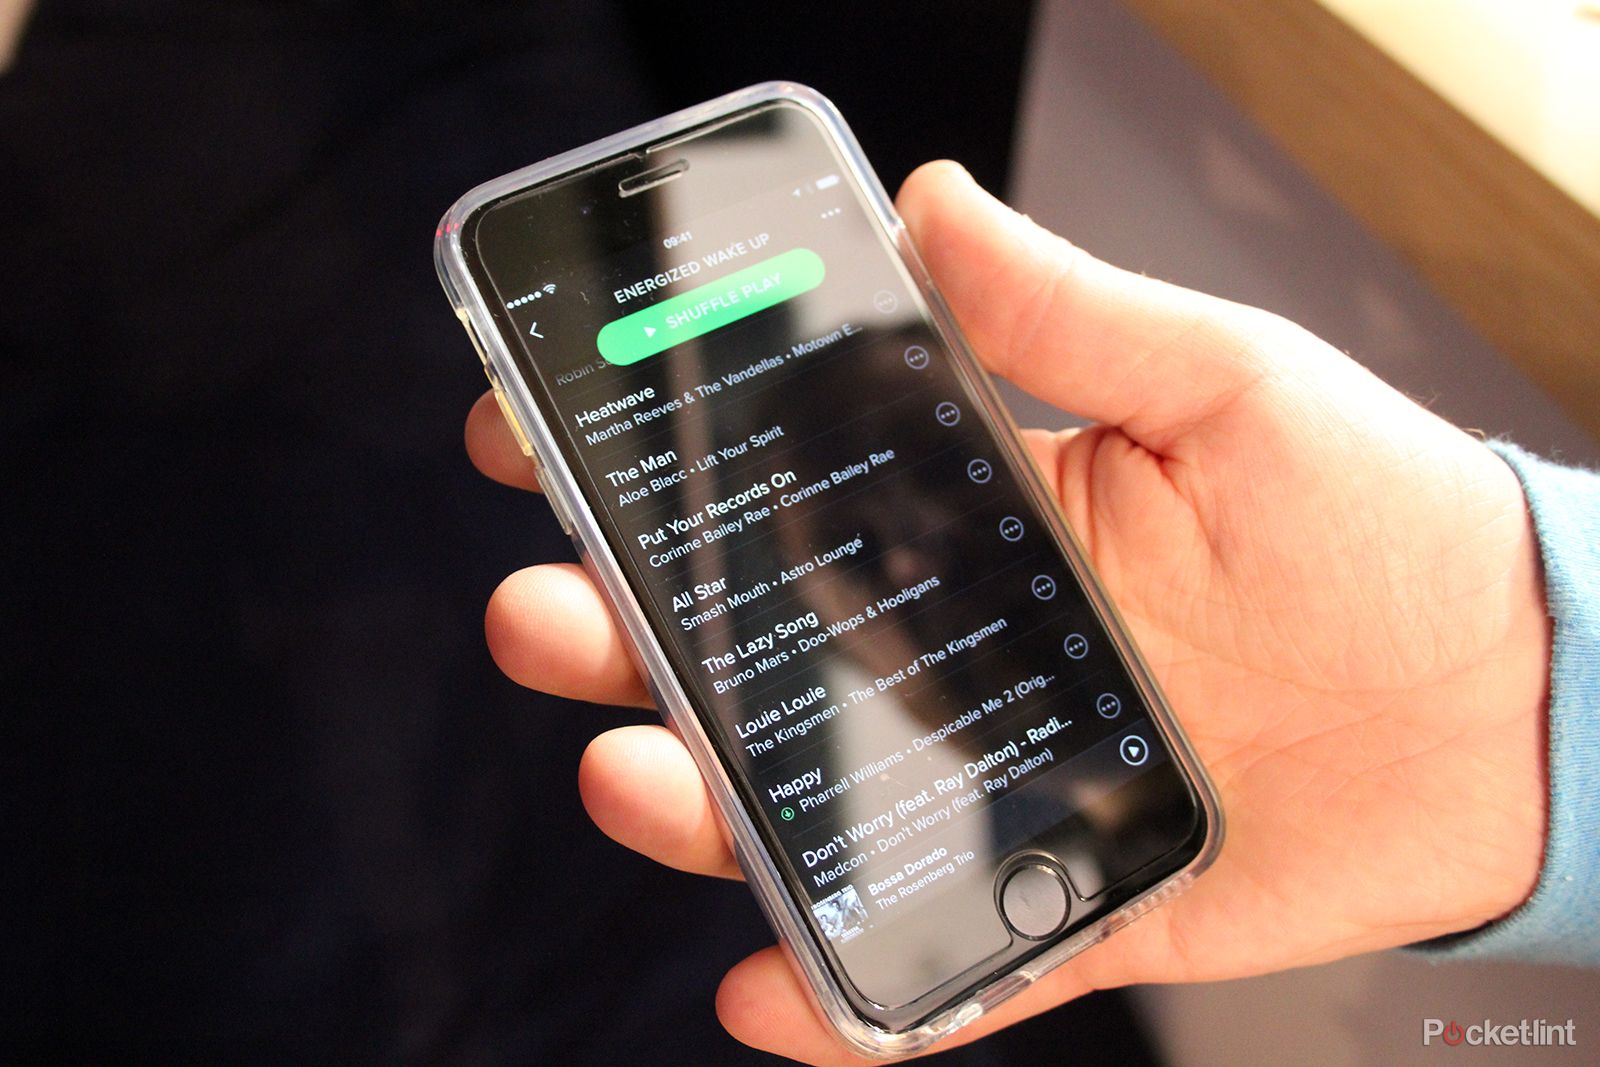 Spotify app running on an iPhone